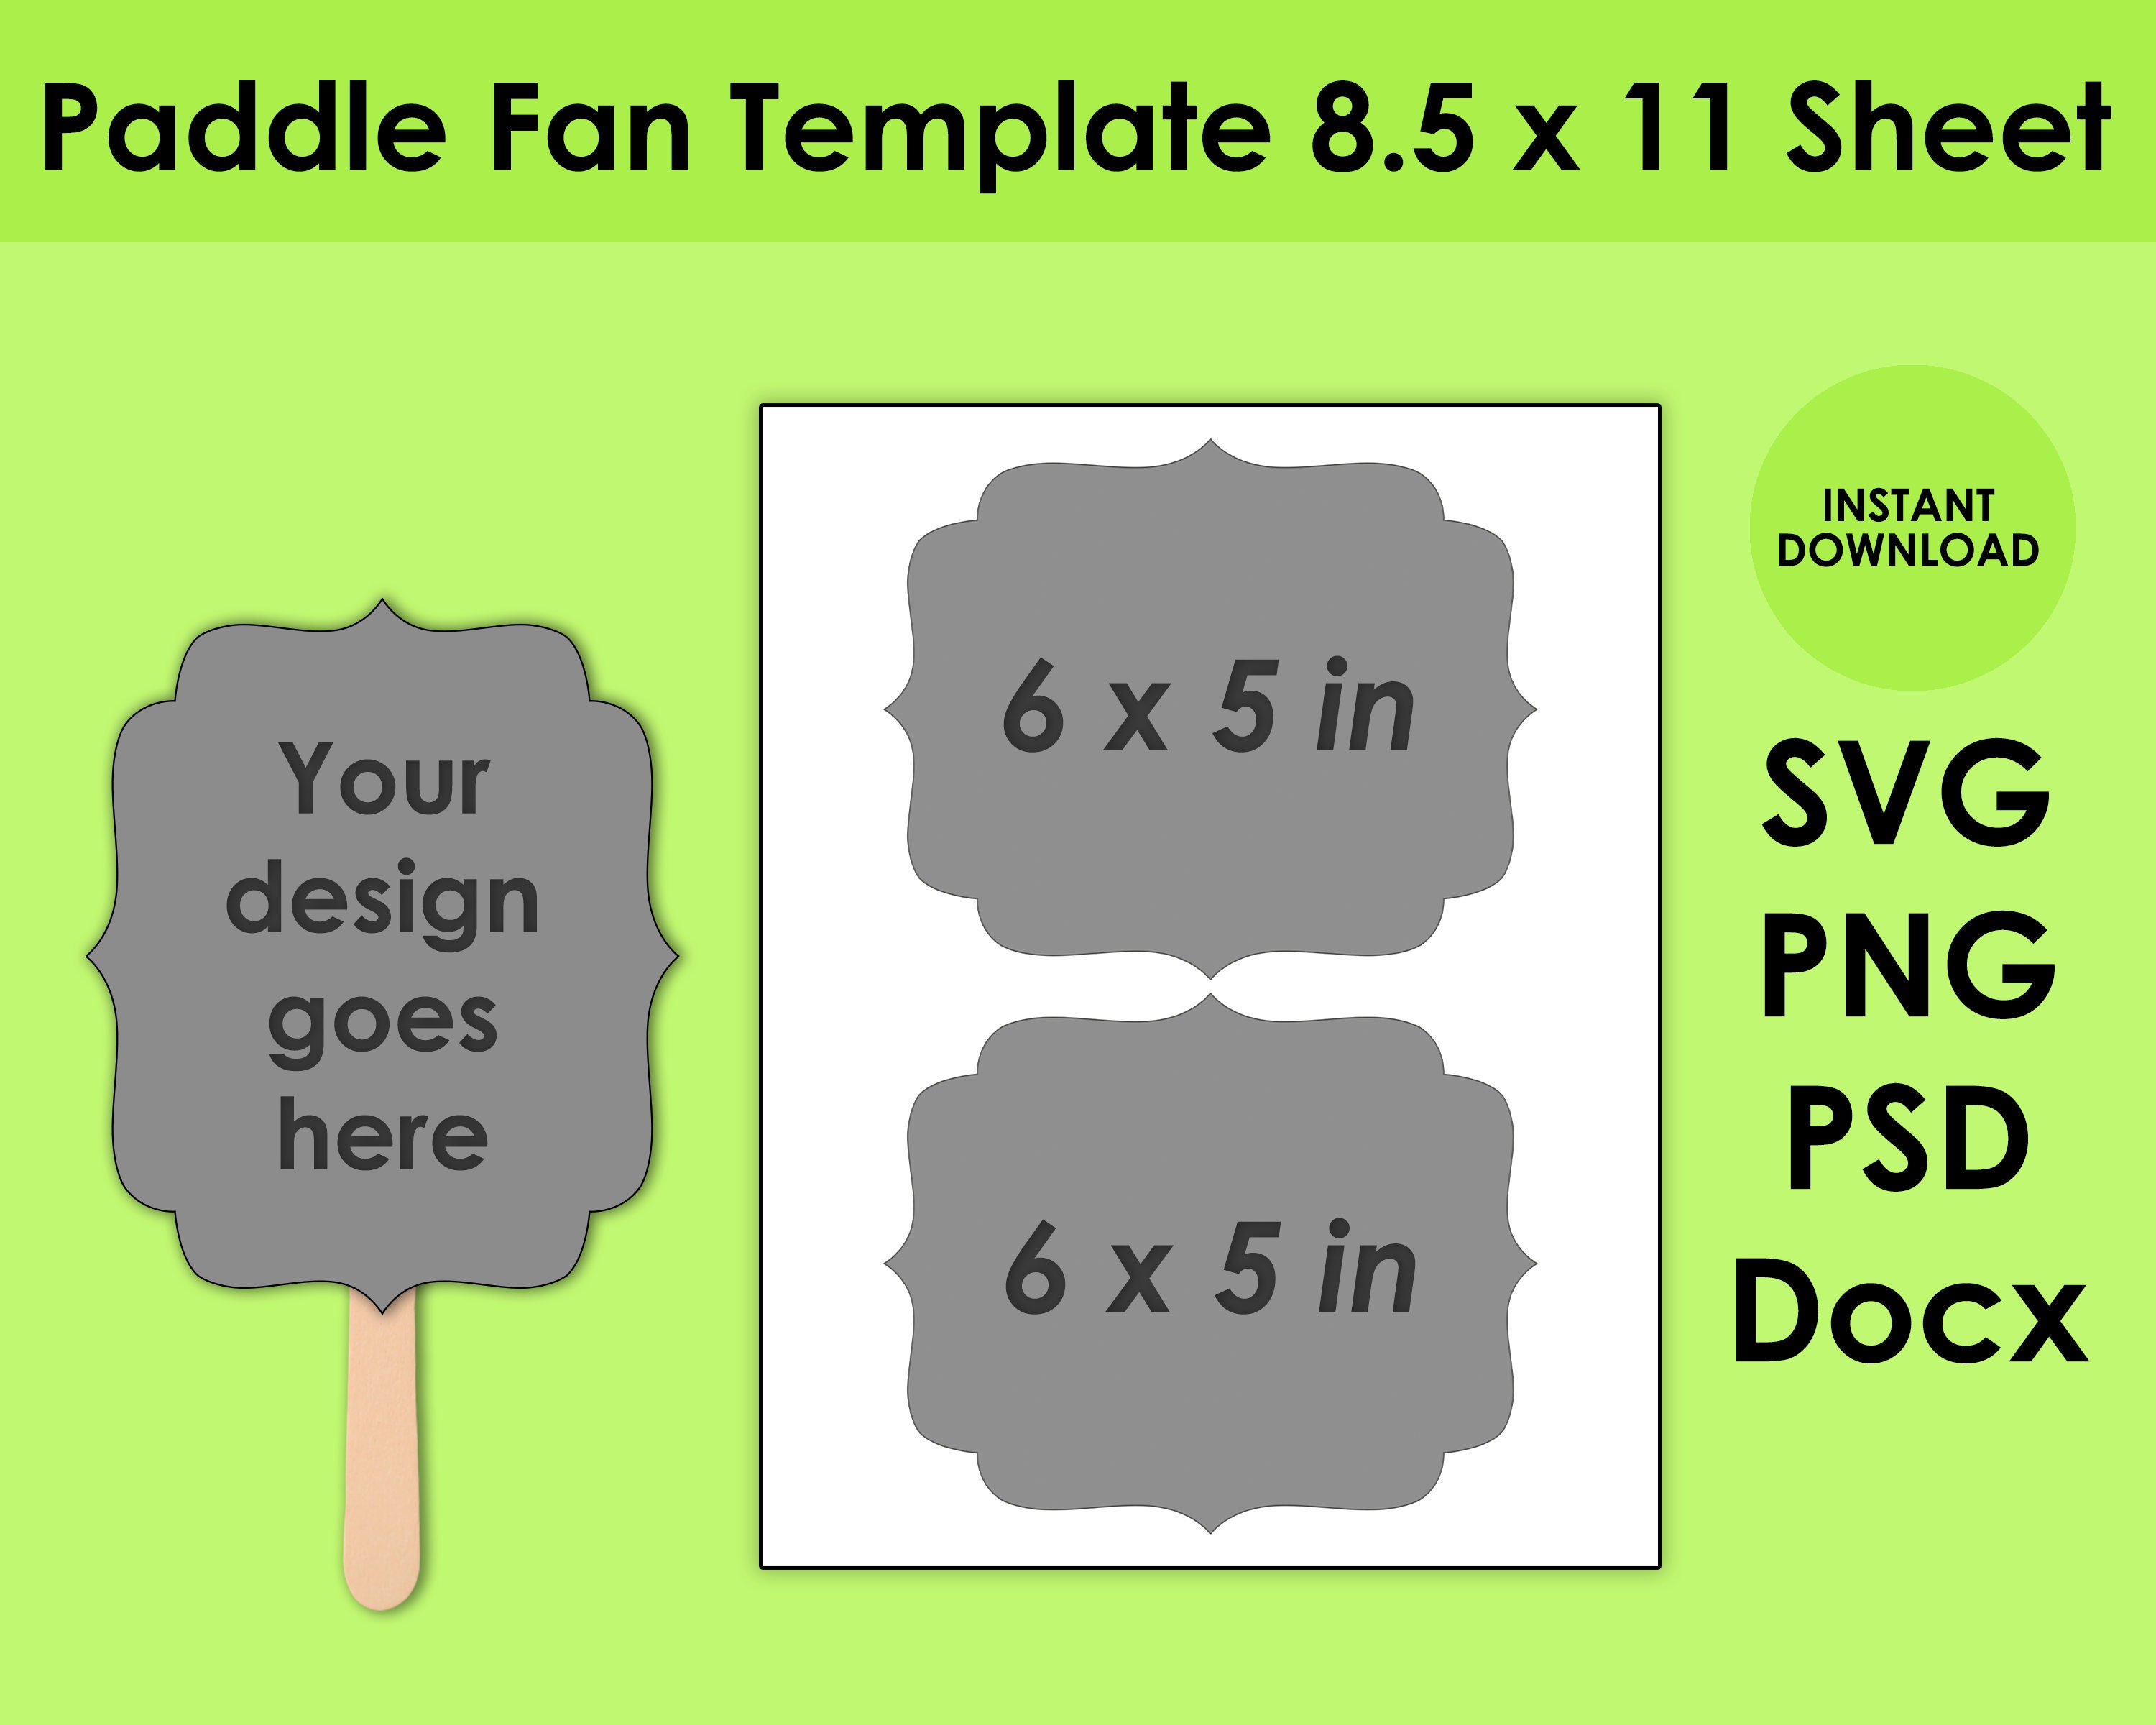 craft-supplies-tools-kids-crafts-wedding-paddle-fan-png-instant